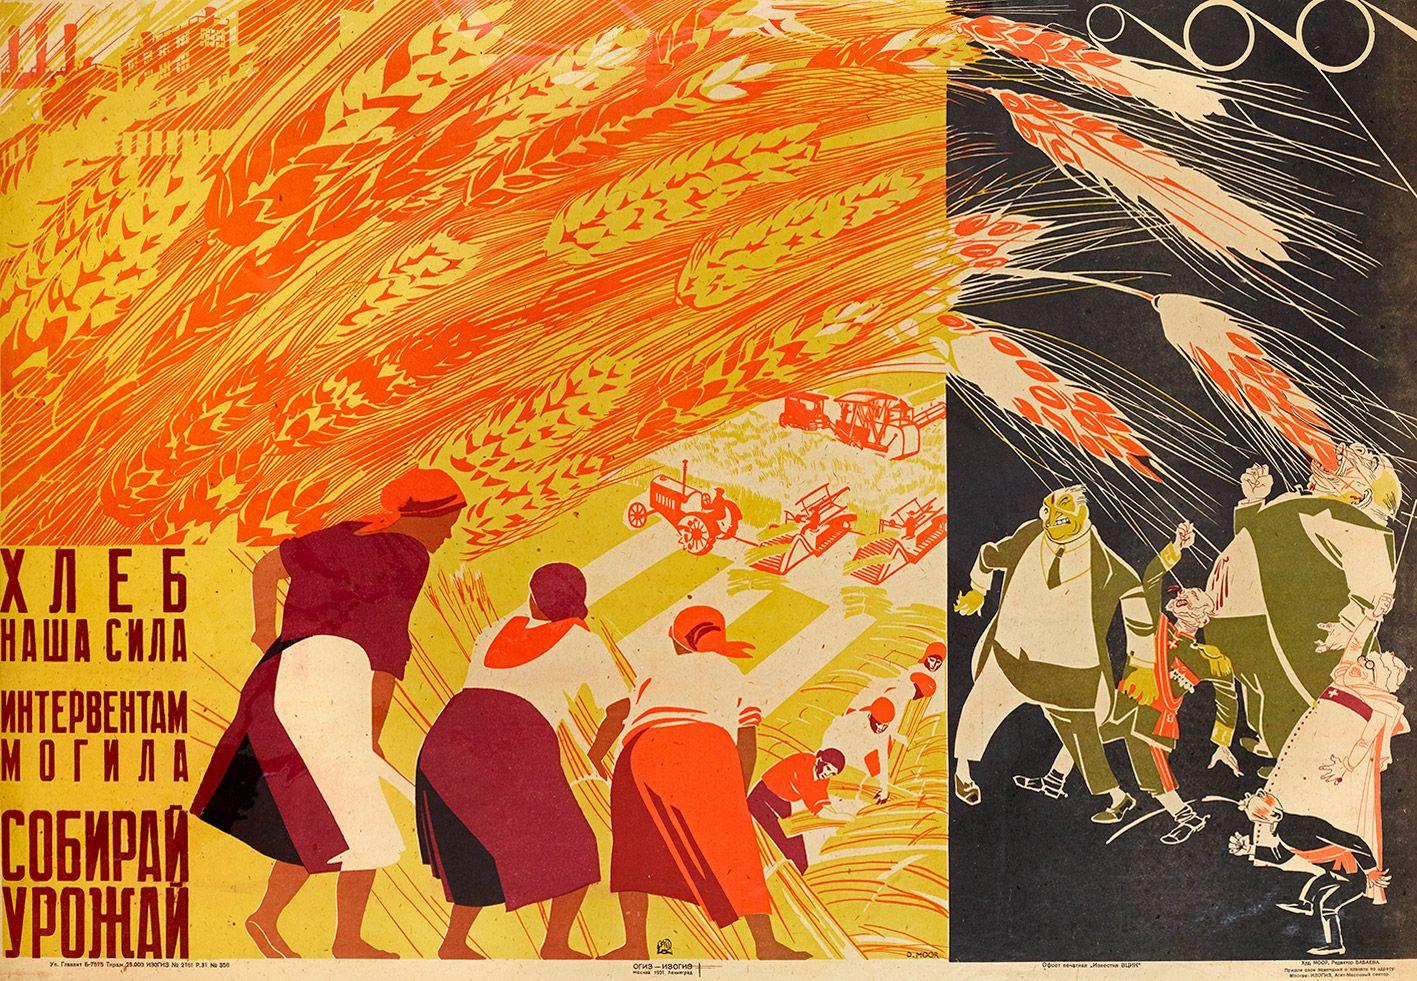 How graphic design shaped the Russian Revolution. Wallpaper*